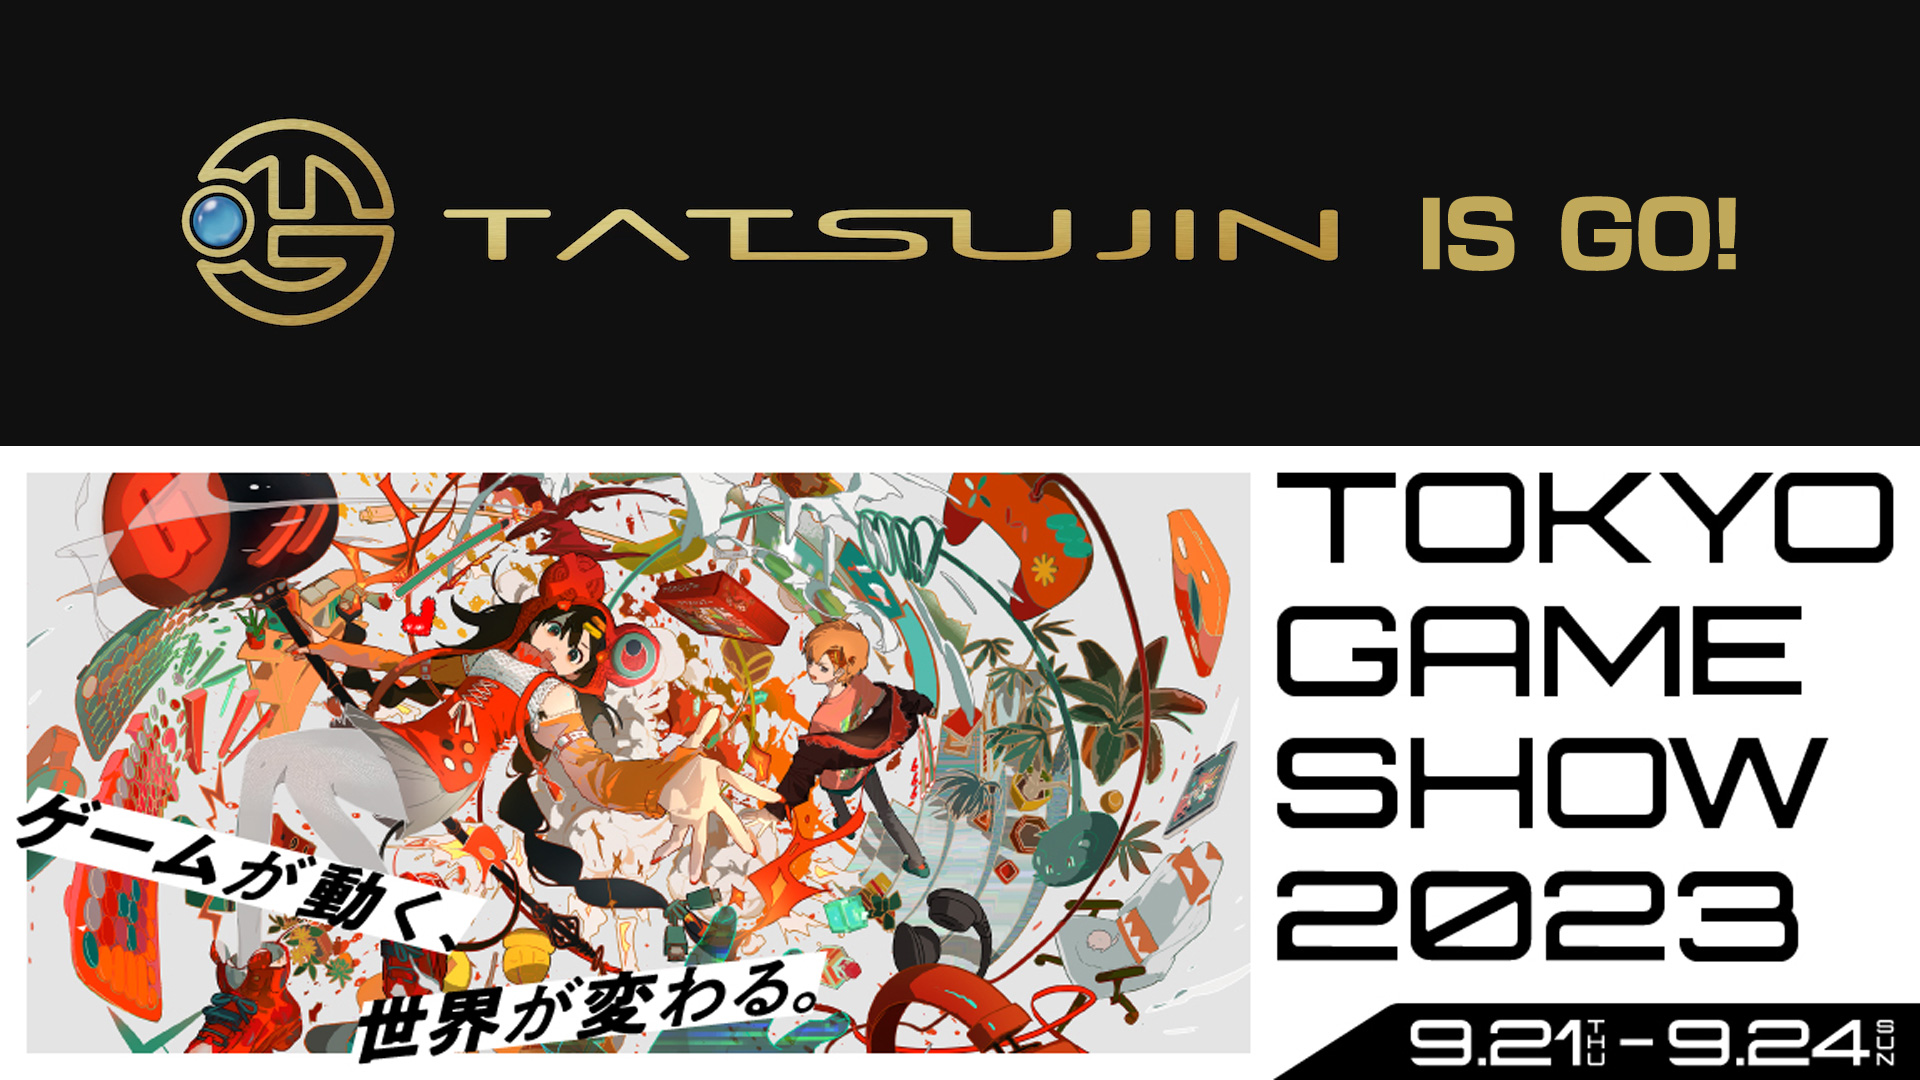 You will have a chance to hear the Saturn Tribute Boosted and EXA LABEL arrangement of "BATSUGUN" live at the live event!